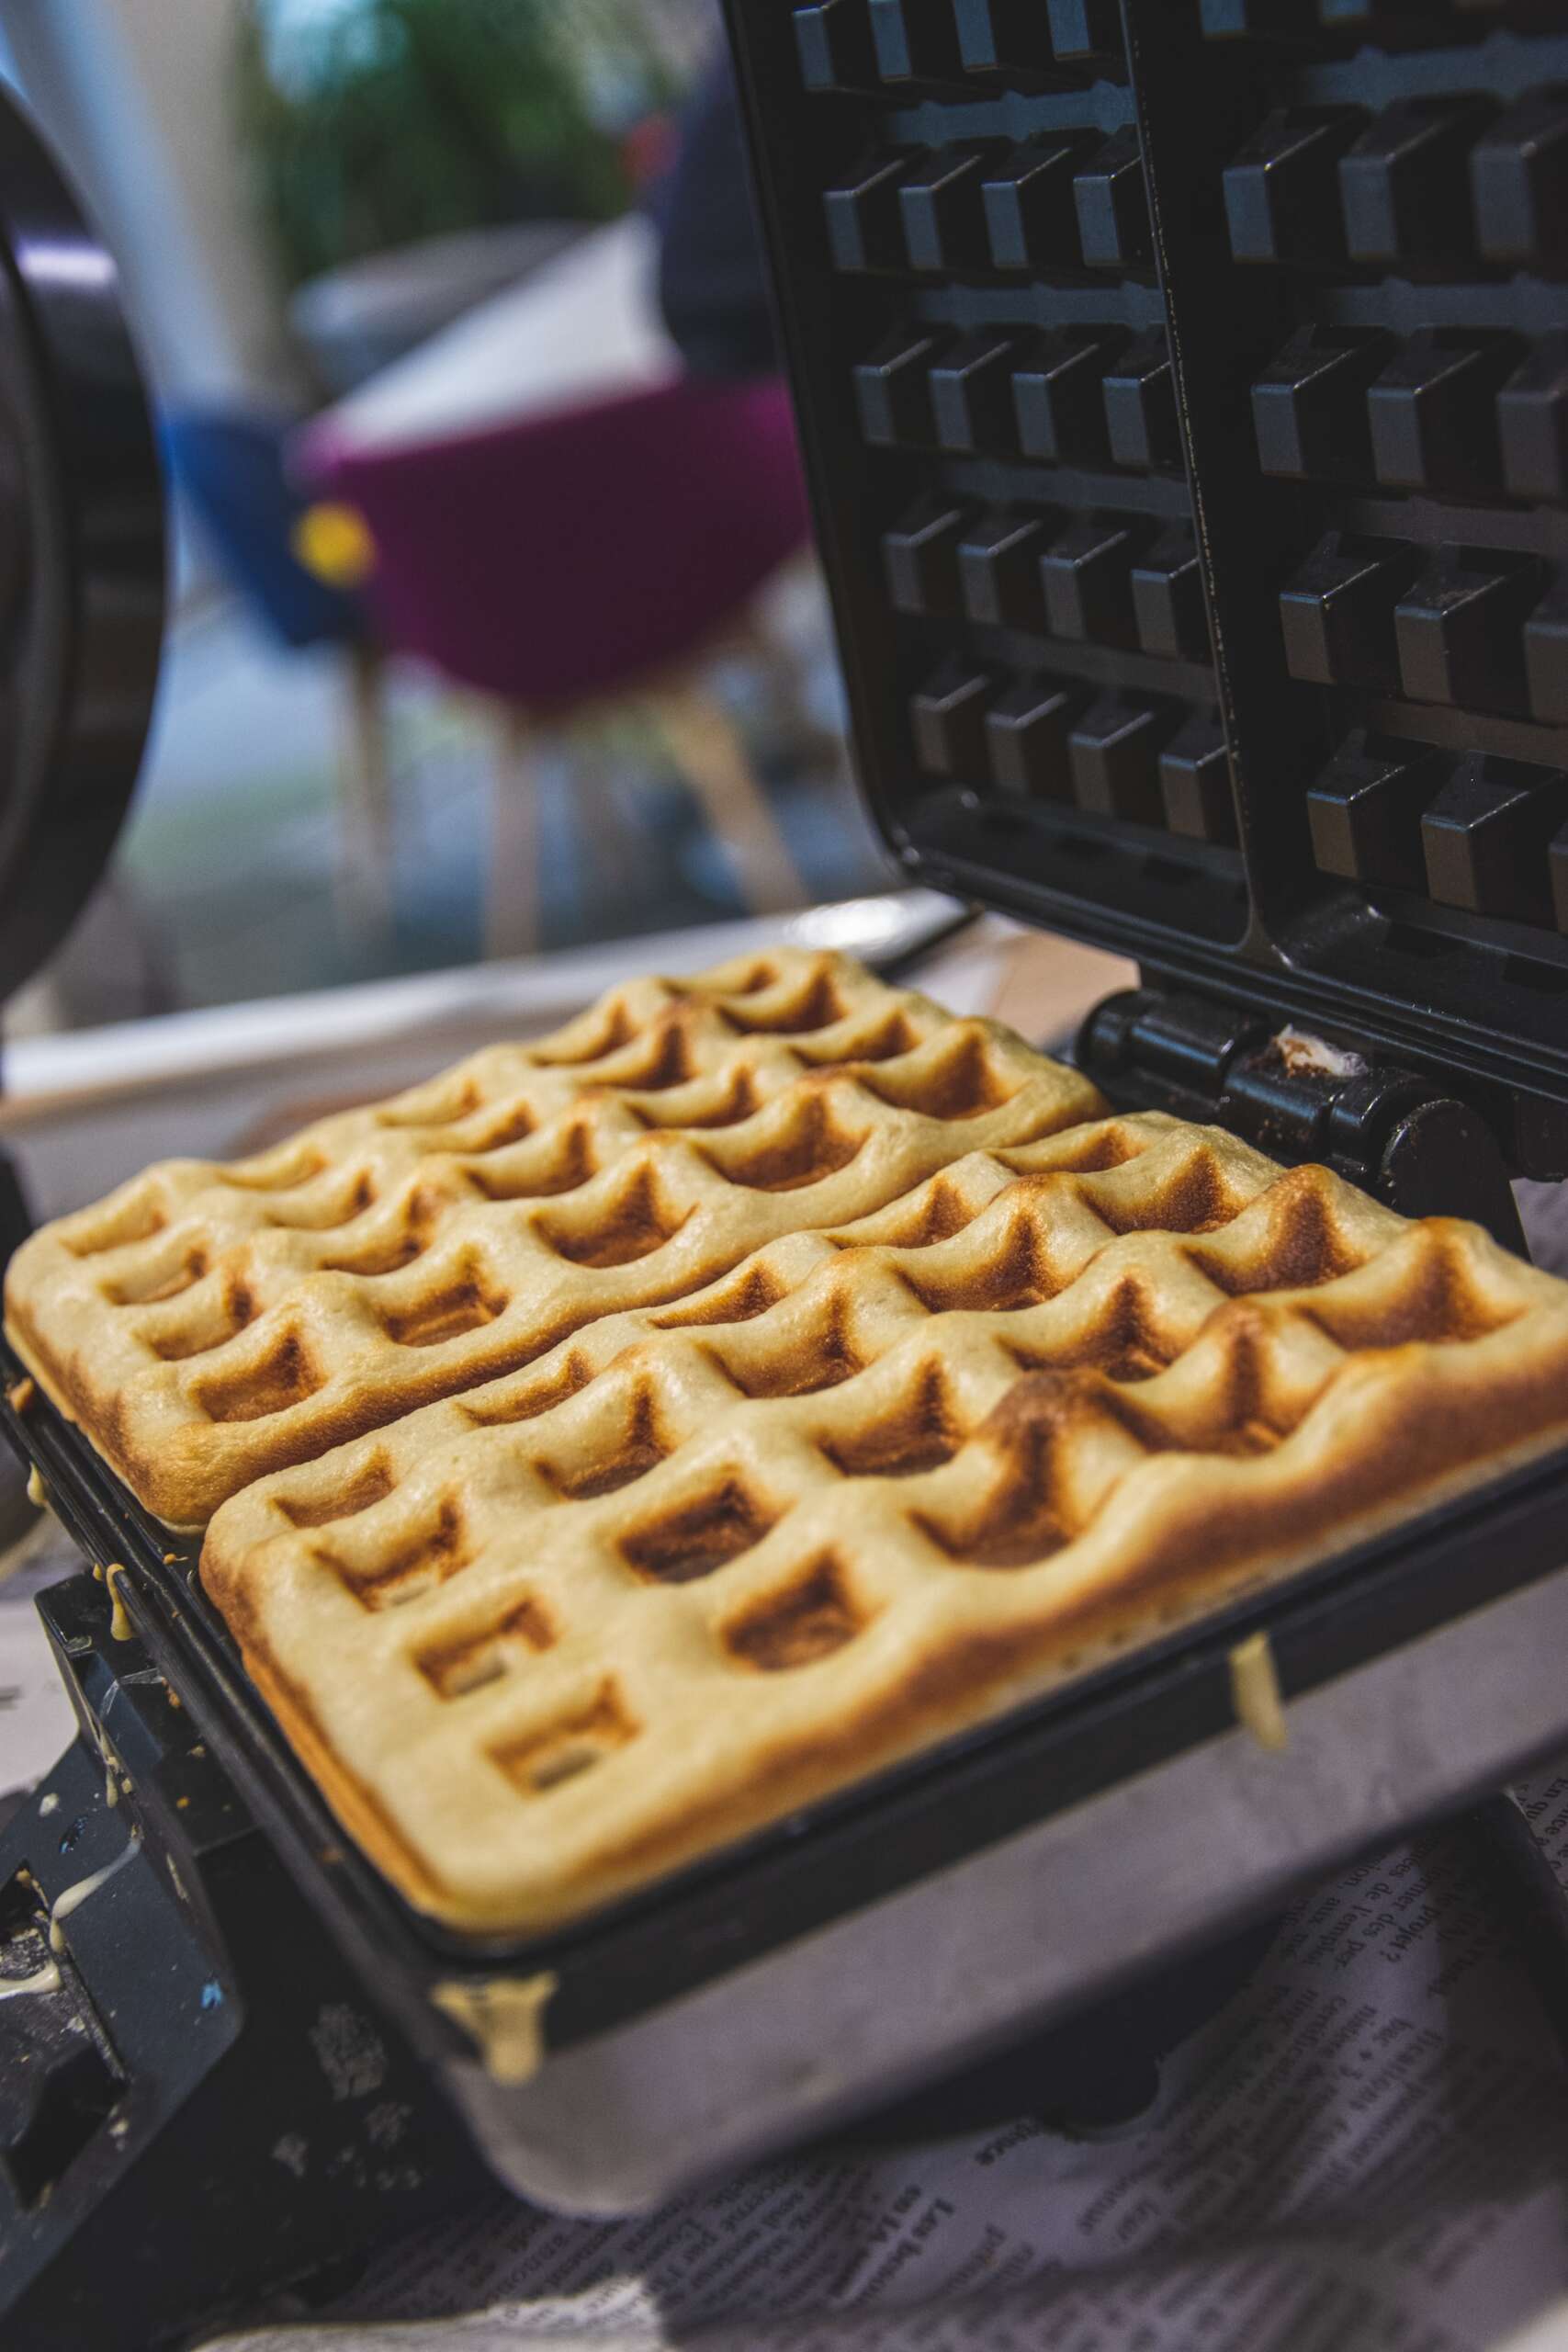 How Do You Clean a Cast Iron Waffle Iron